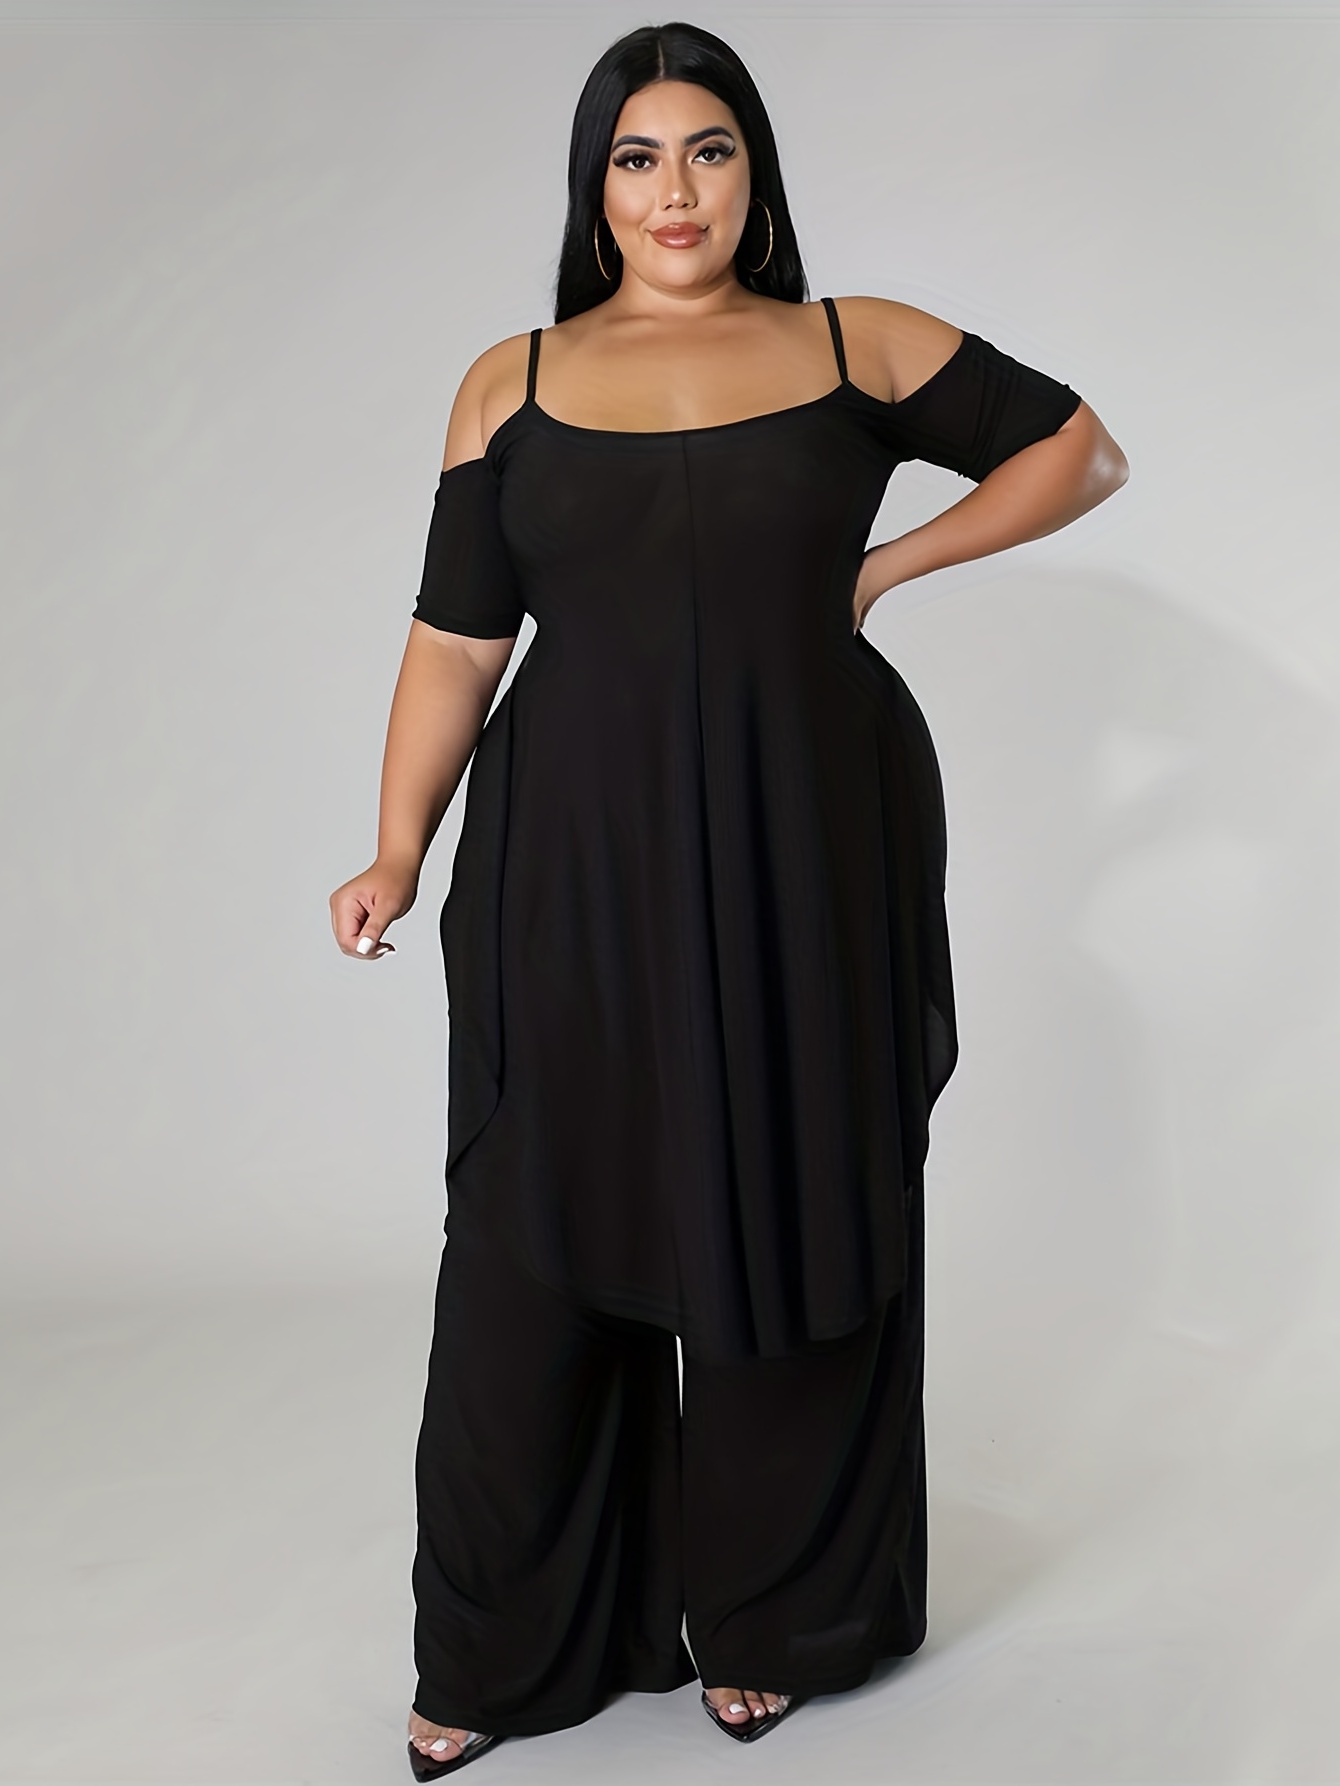 Plus Size Sexy Outfits Set, Women's Plus Letter Print Short Sleeve Top &  Semi Sheer Pants Outfits Two Piece Set